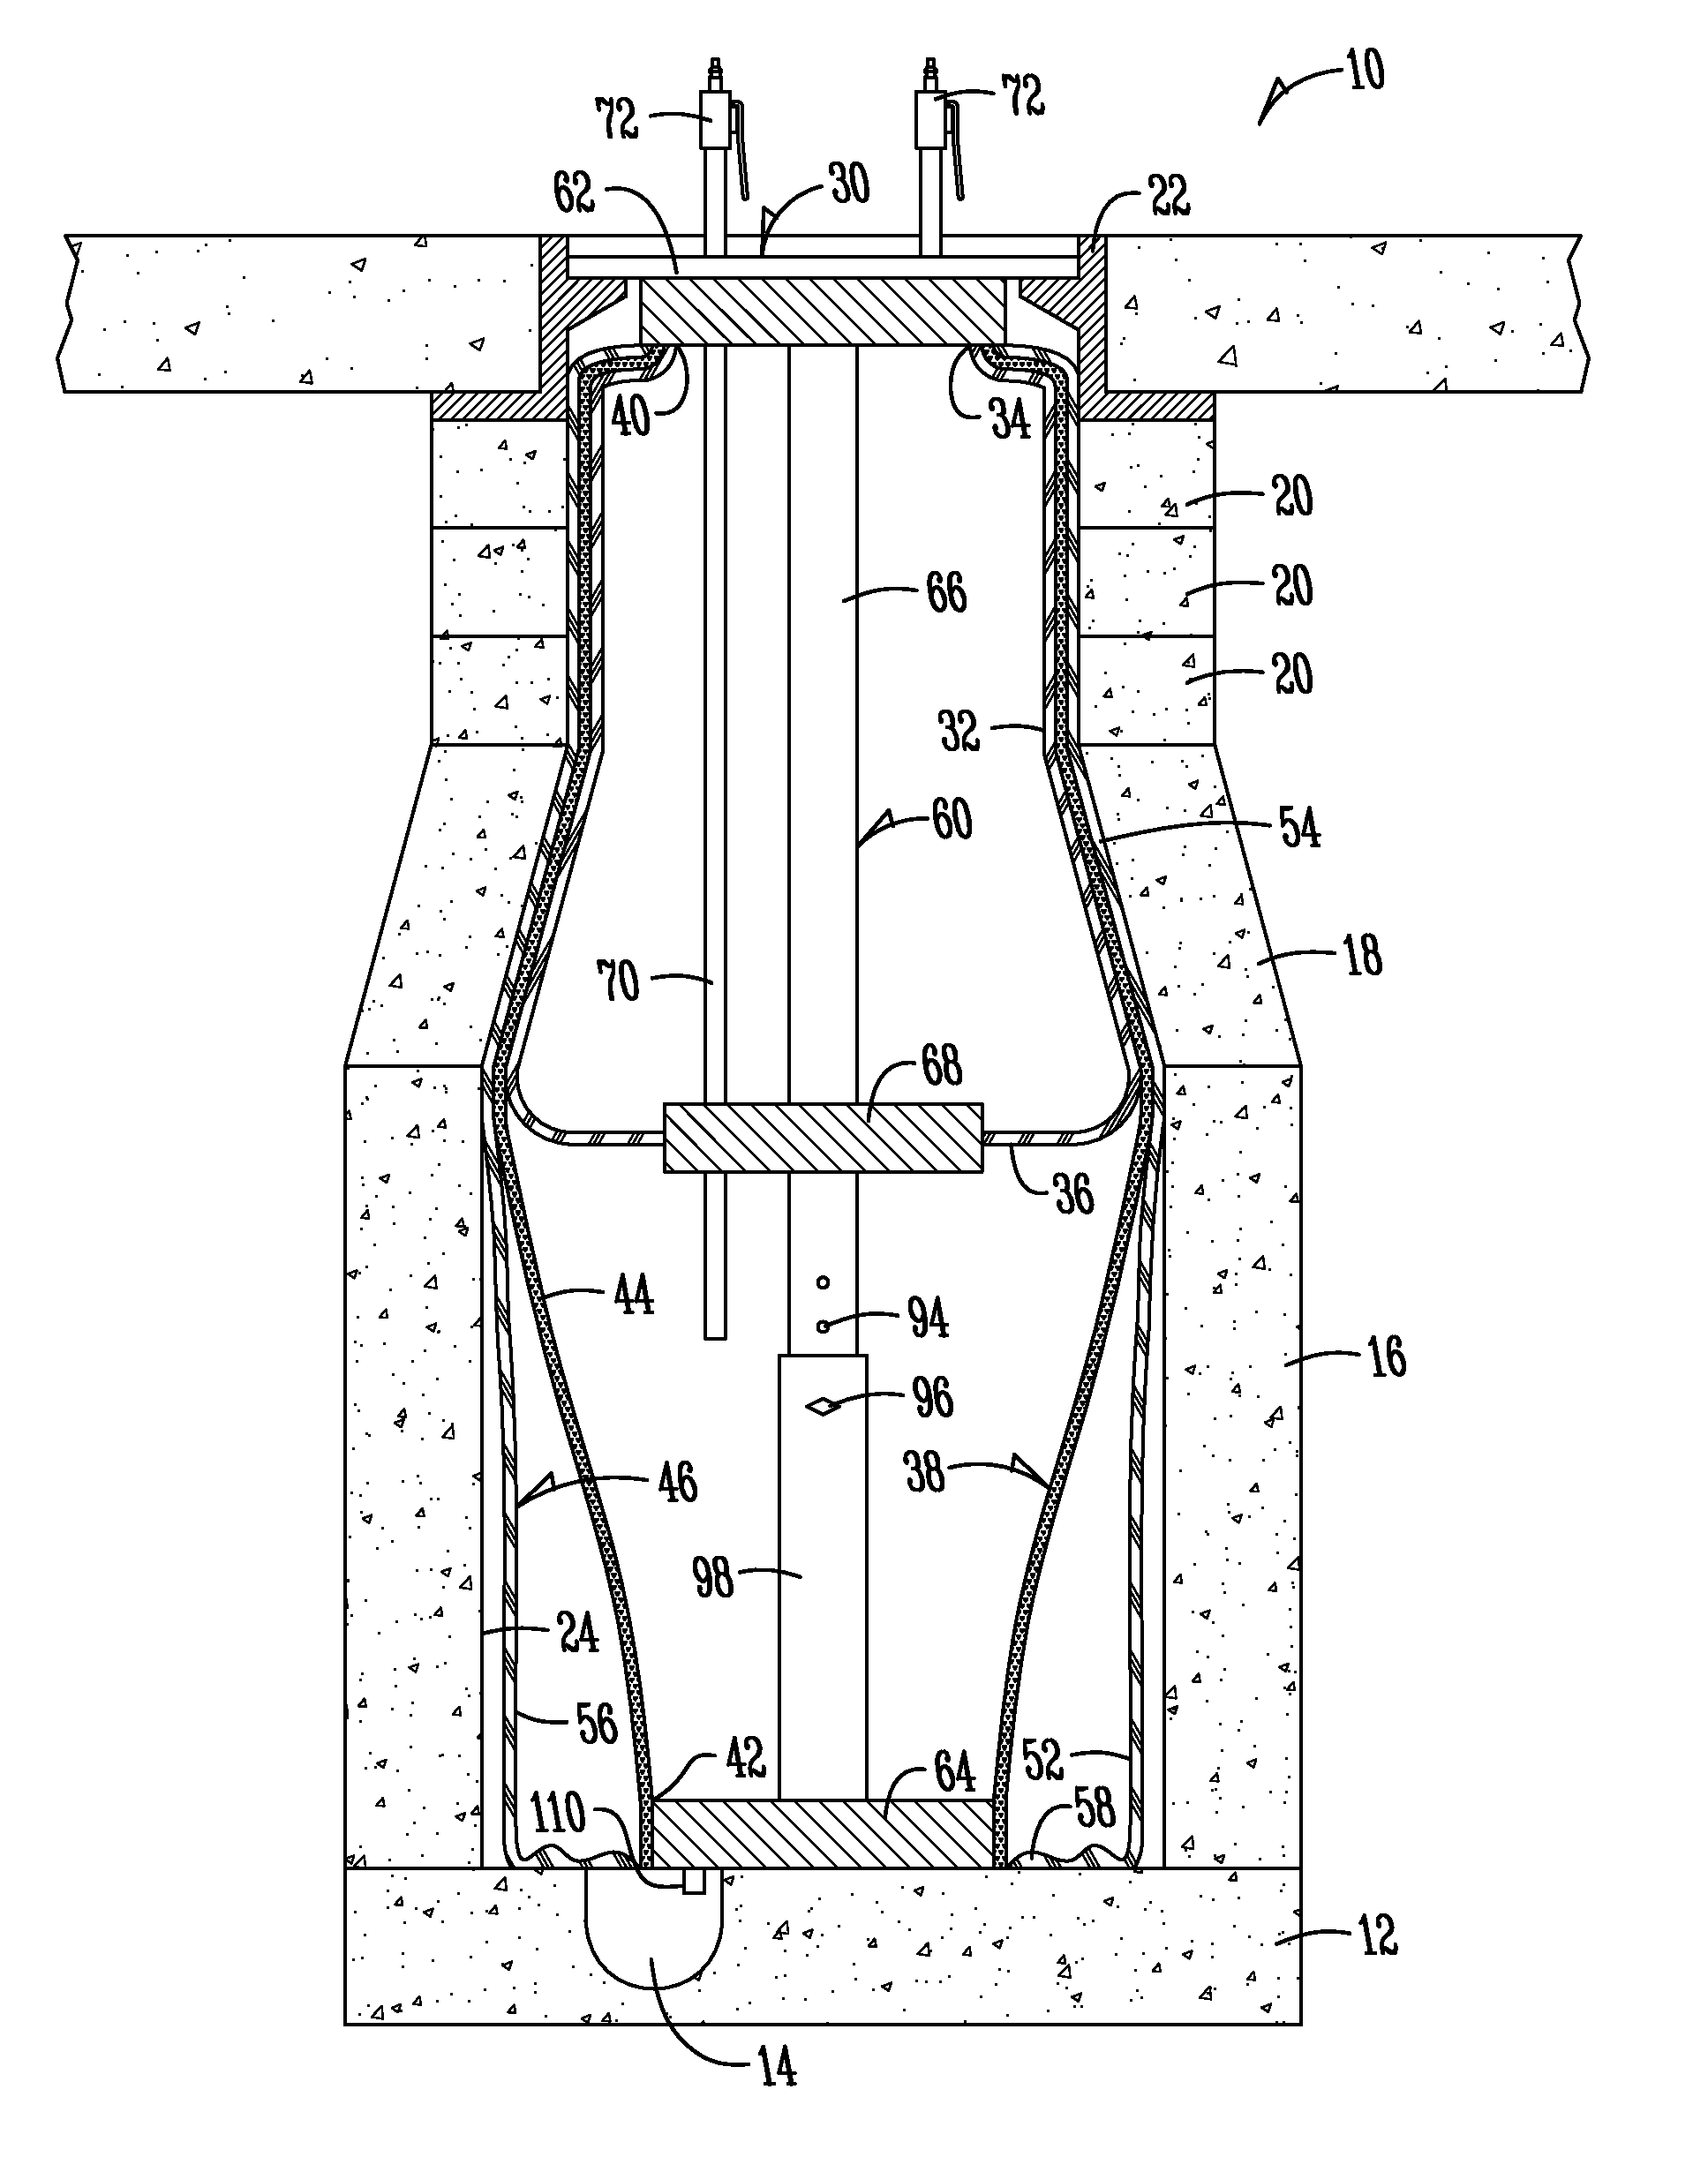 Method and means of lining a manhole